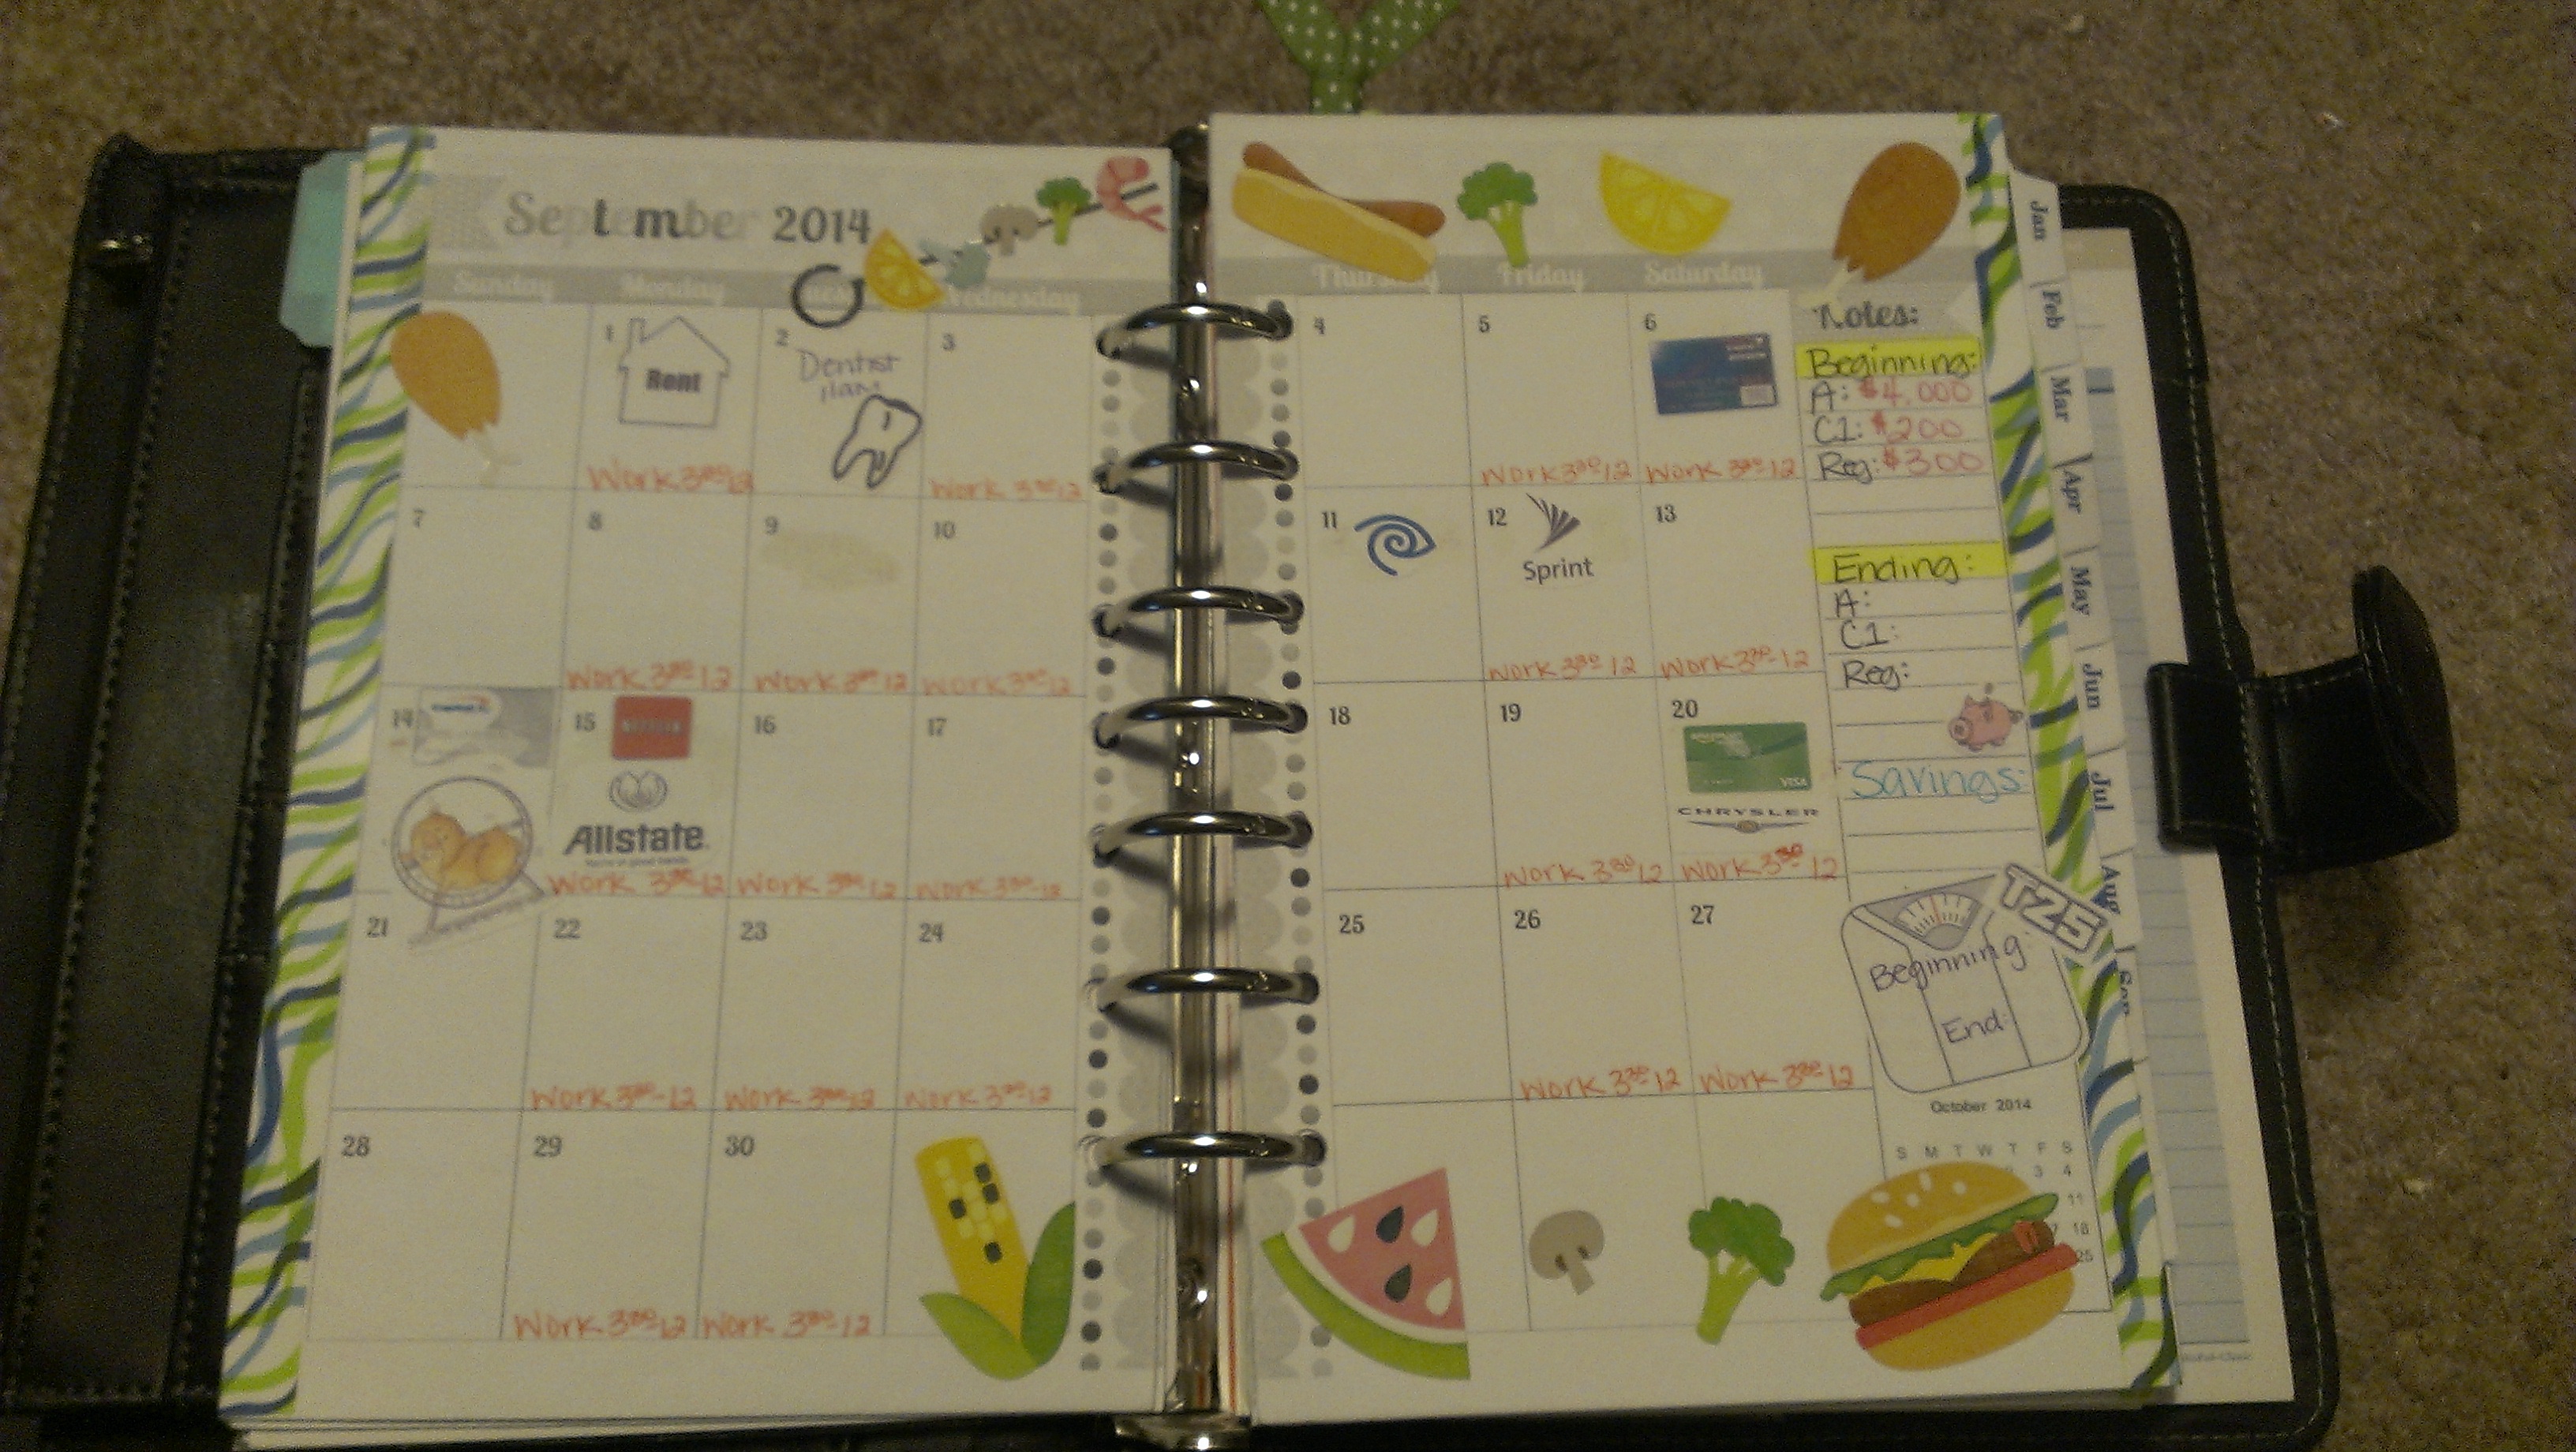 Theresa uses stickers she makes herself for her Franklin Covey Planner